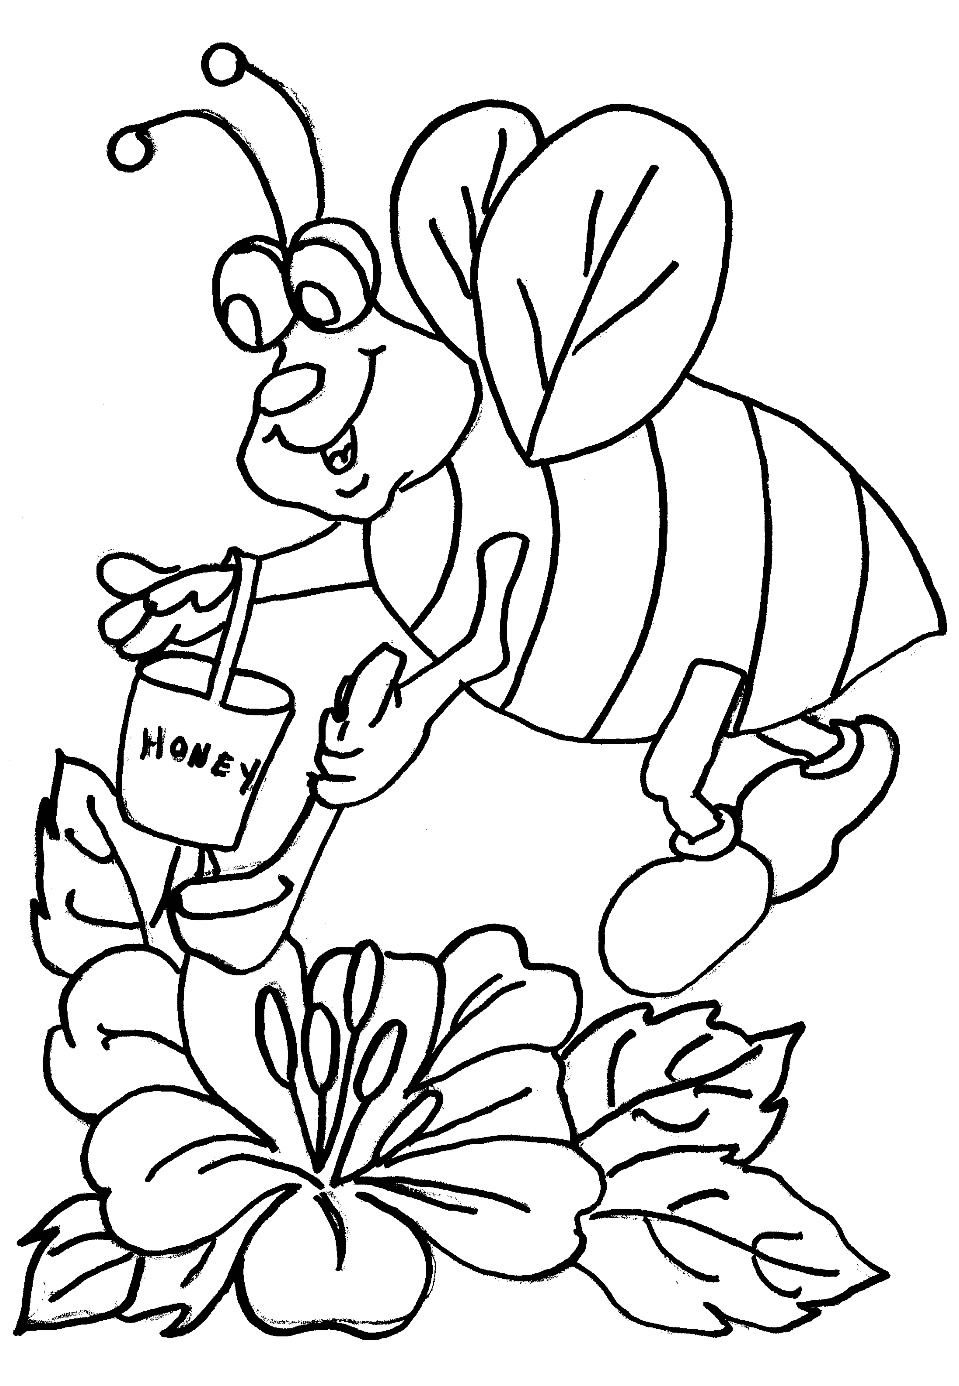 Free Honey Bee Coloring Pages | Coloring